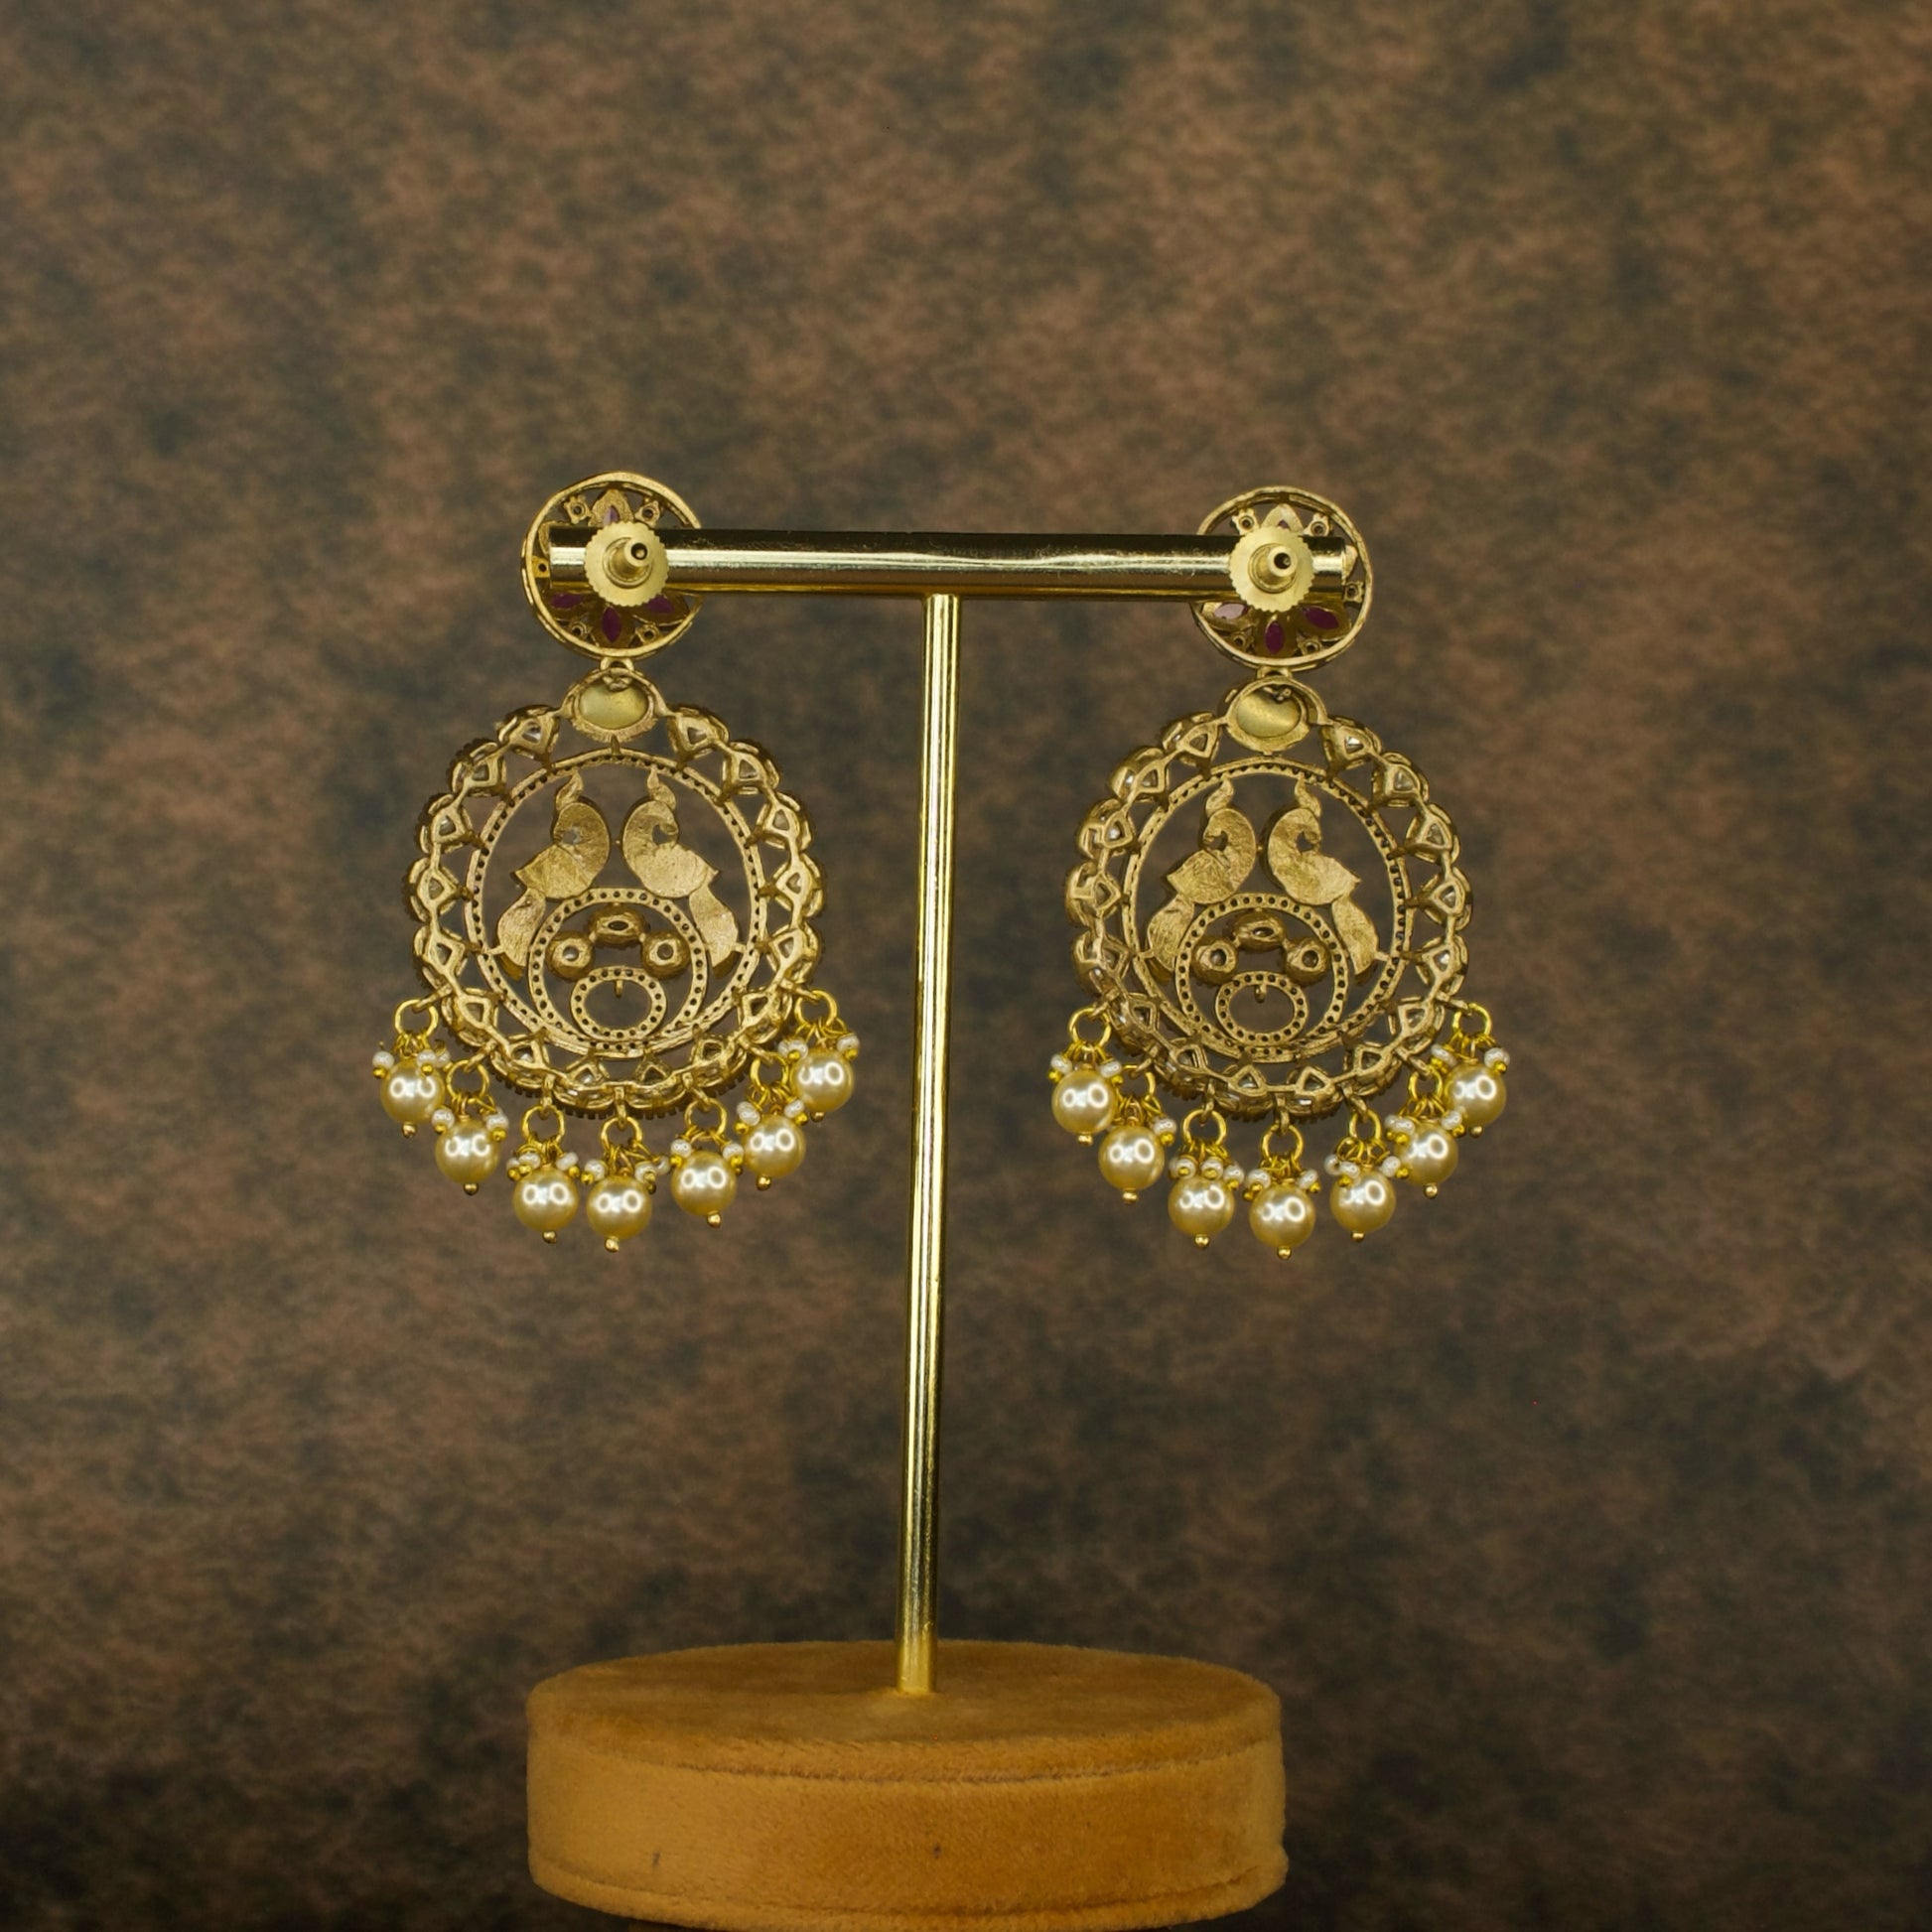 Floral Ring peacock design Victorian Chandbali Earrings with High Quality Victorian Finish . This product belongs to Victorian Jewellery Category